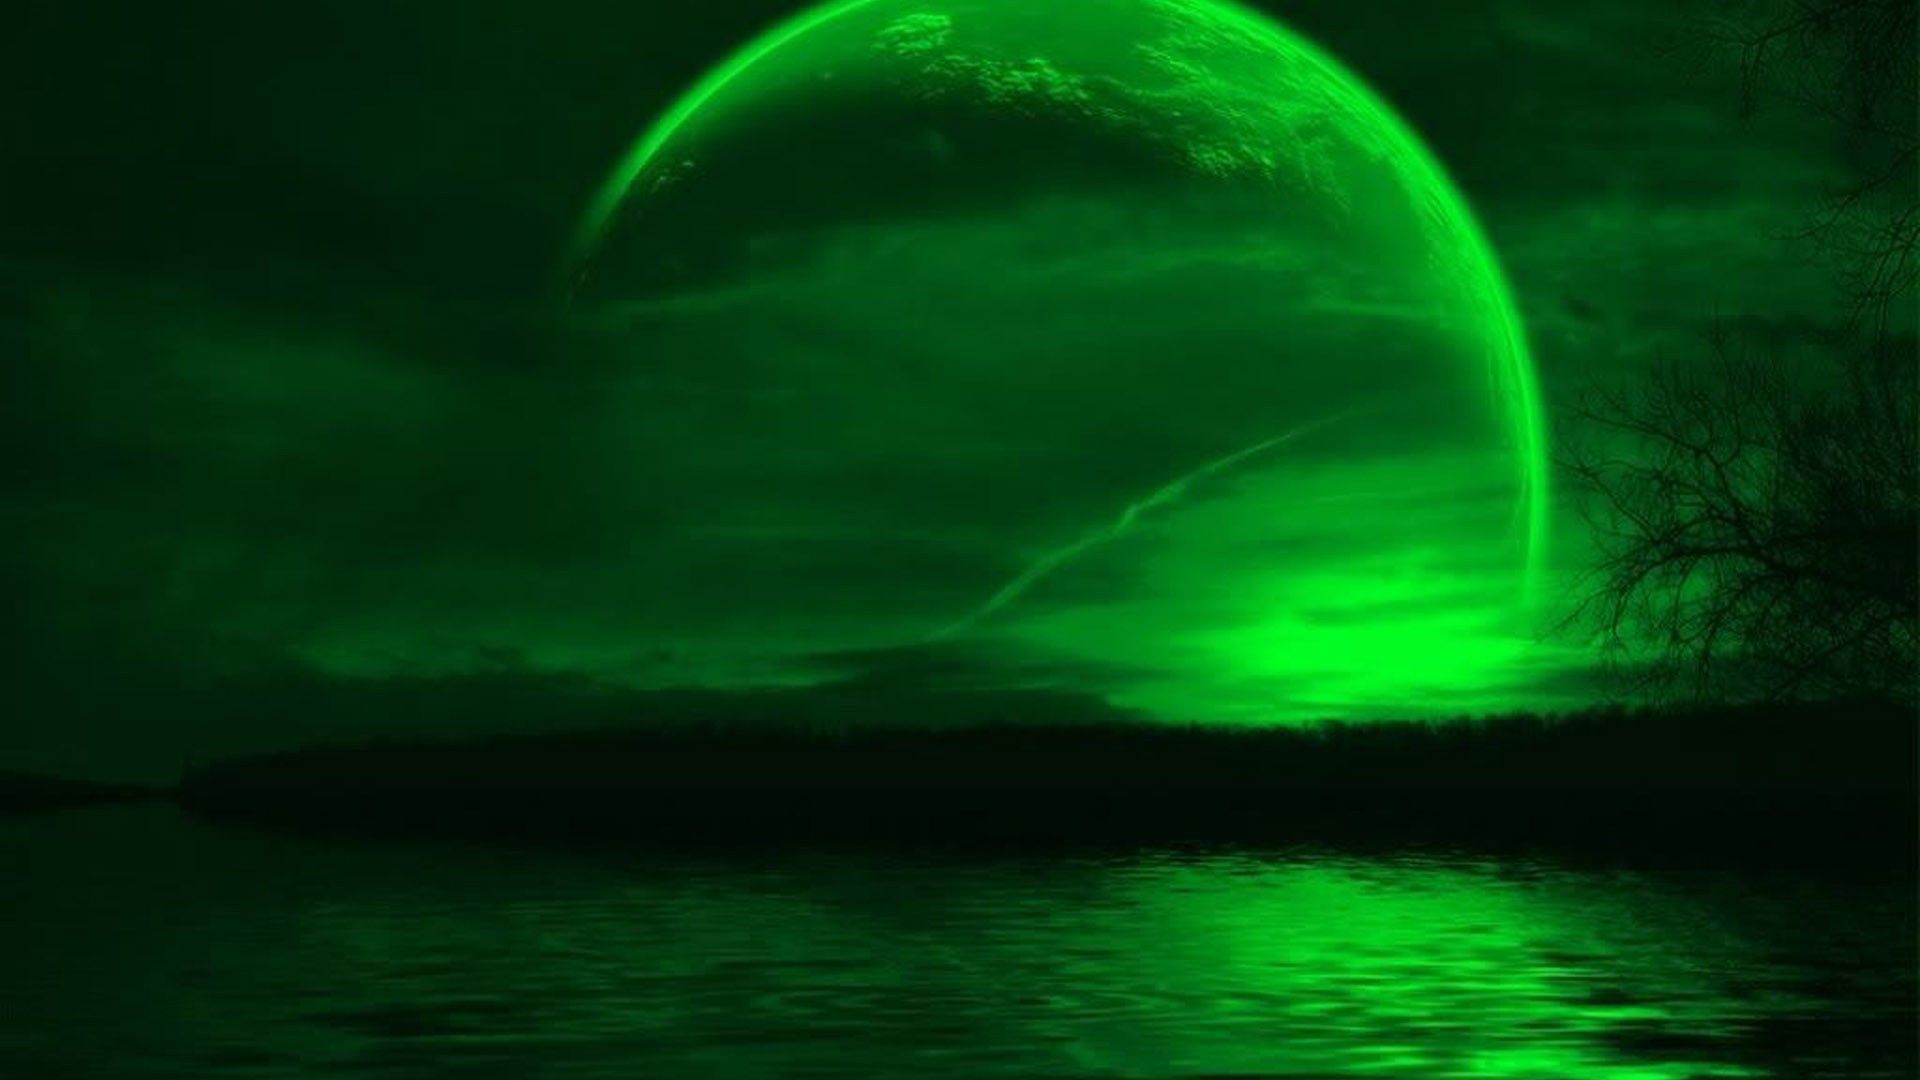 A green planet in the sky - Neon green, 1920x1080, lime green